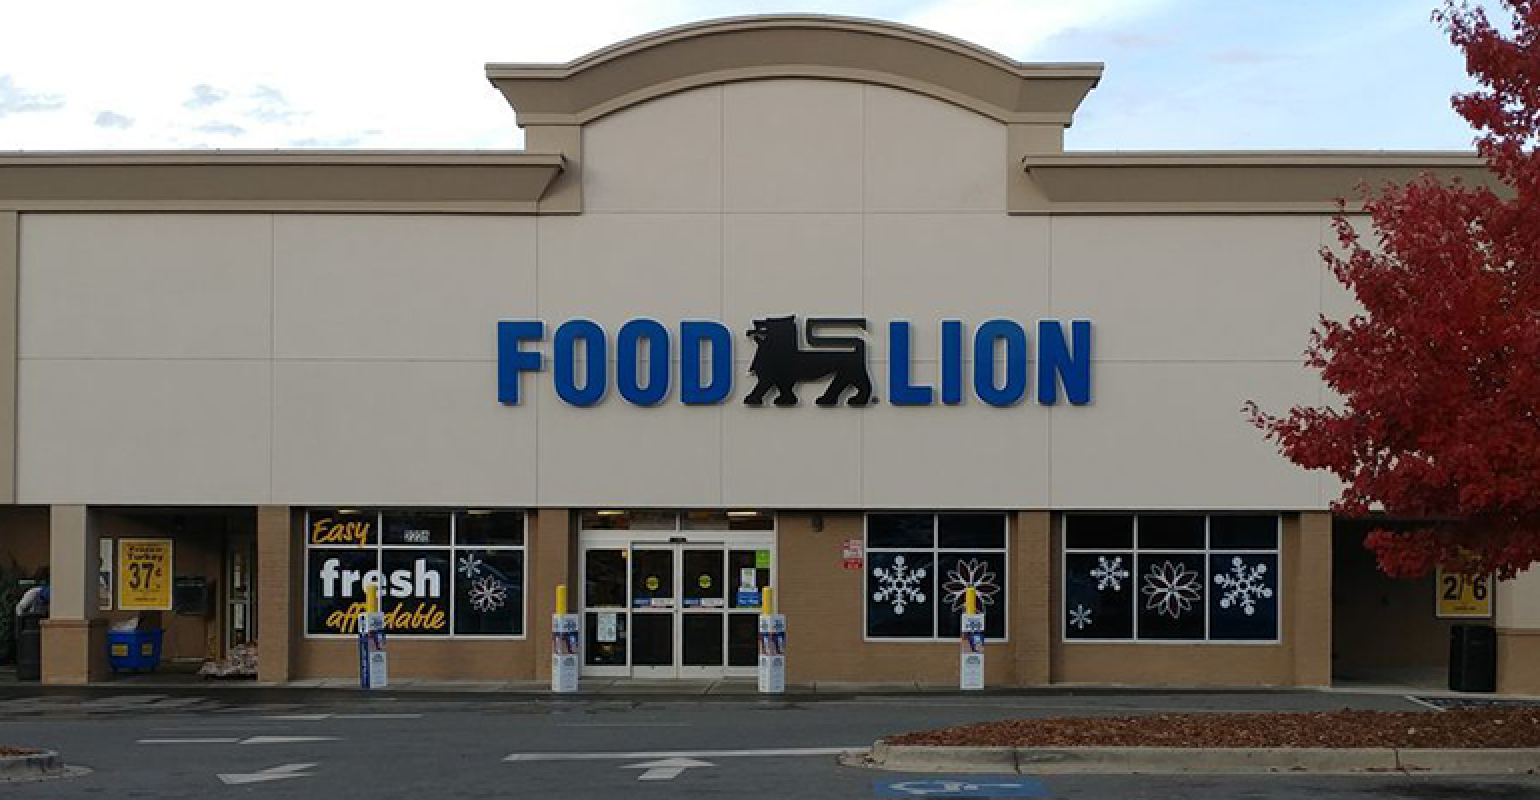 Food Lion |Farm fresh grocery remodeled into millions of revenue